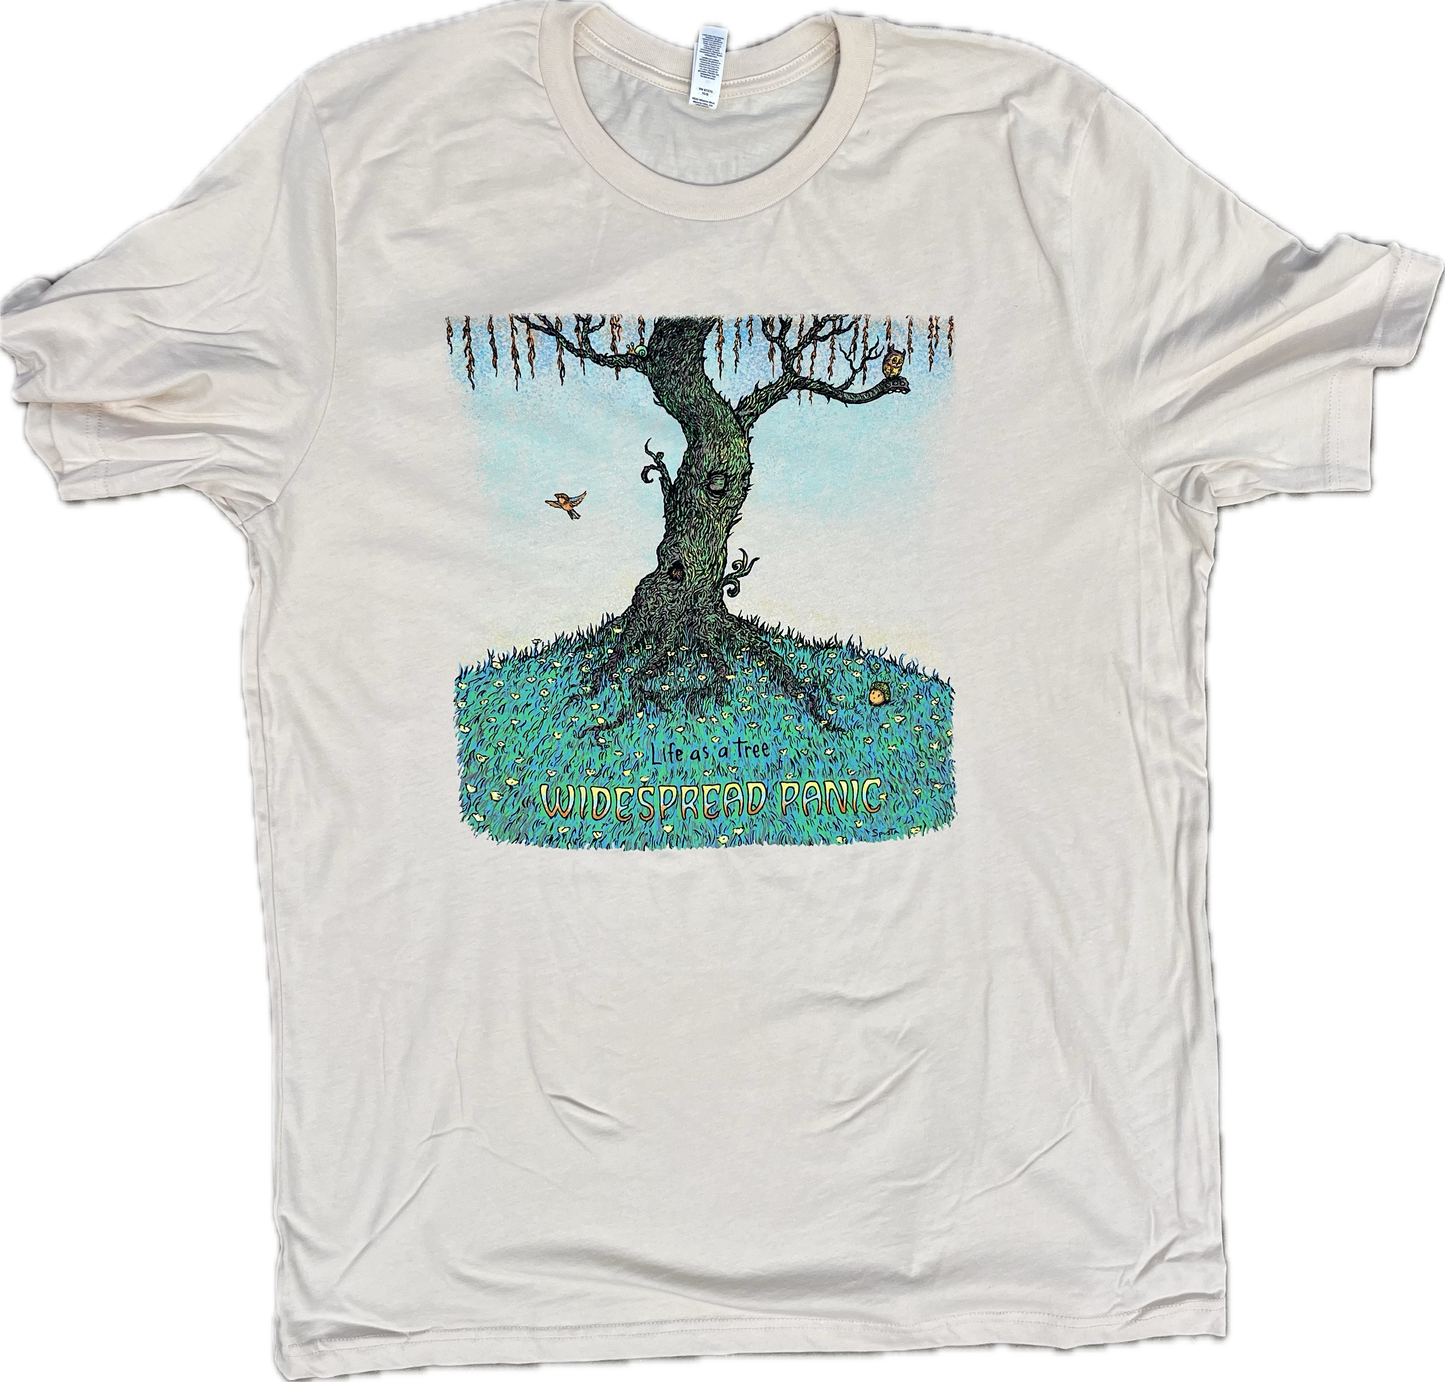 "Life As A Tree" Song Shirt by Marq Spusta